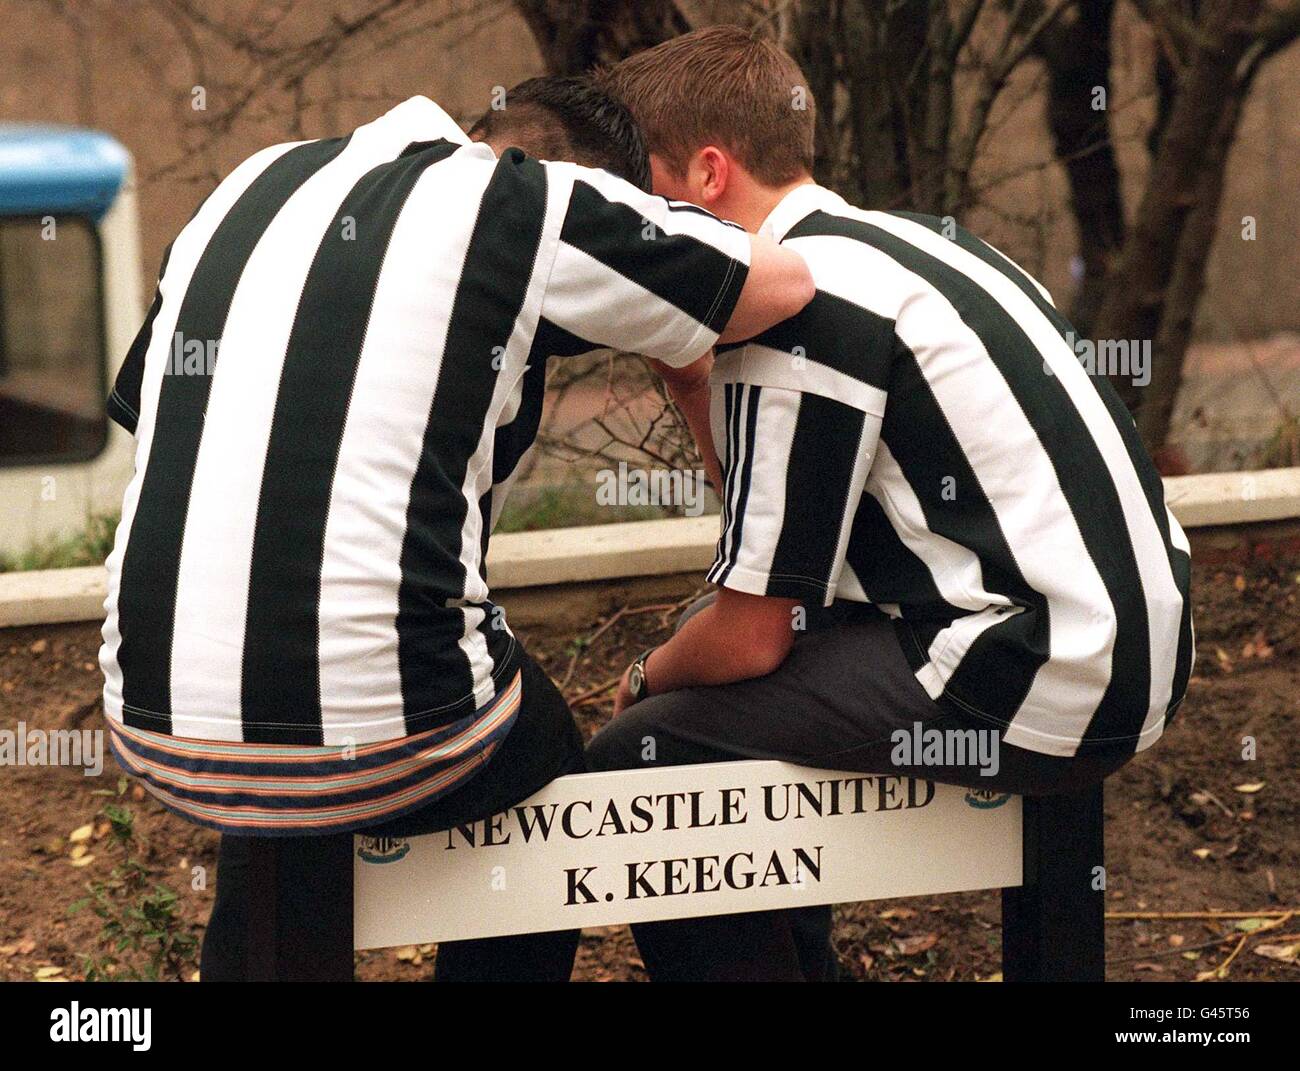 Vacant slot, the car park space for Kevin Keegan is mourned over by fans at St James Park today (Wednesday) after the shock resignation by Keegan as manager of Newcsatle United. Photo by John Giles.PA. SEE PA STORIES SOCCER Keegan and SPORT Keegan. Stock Photo